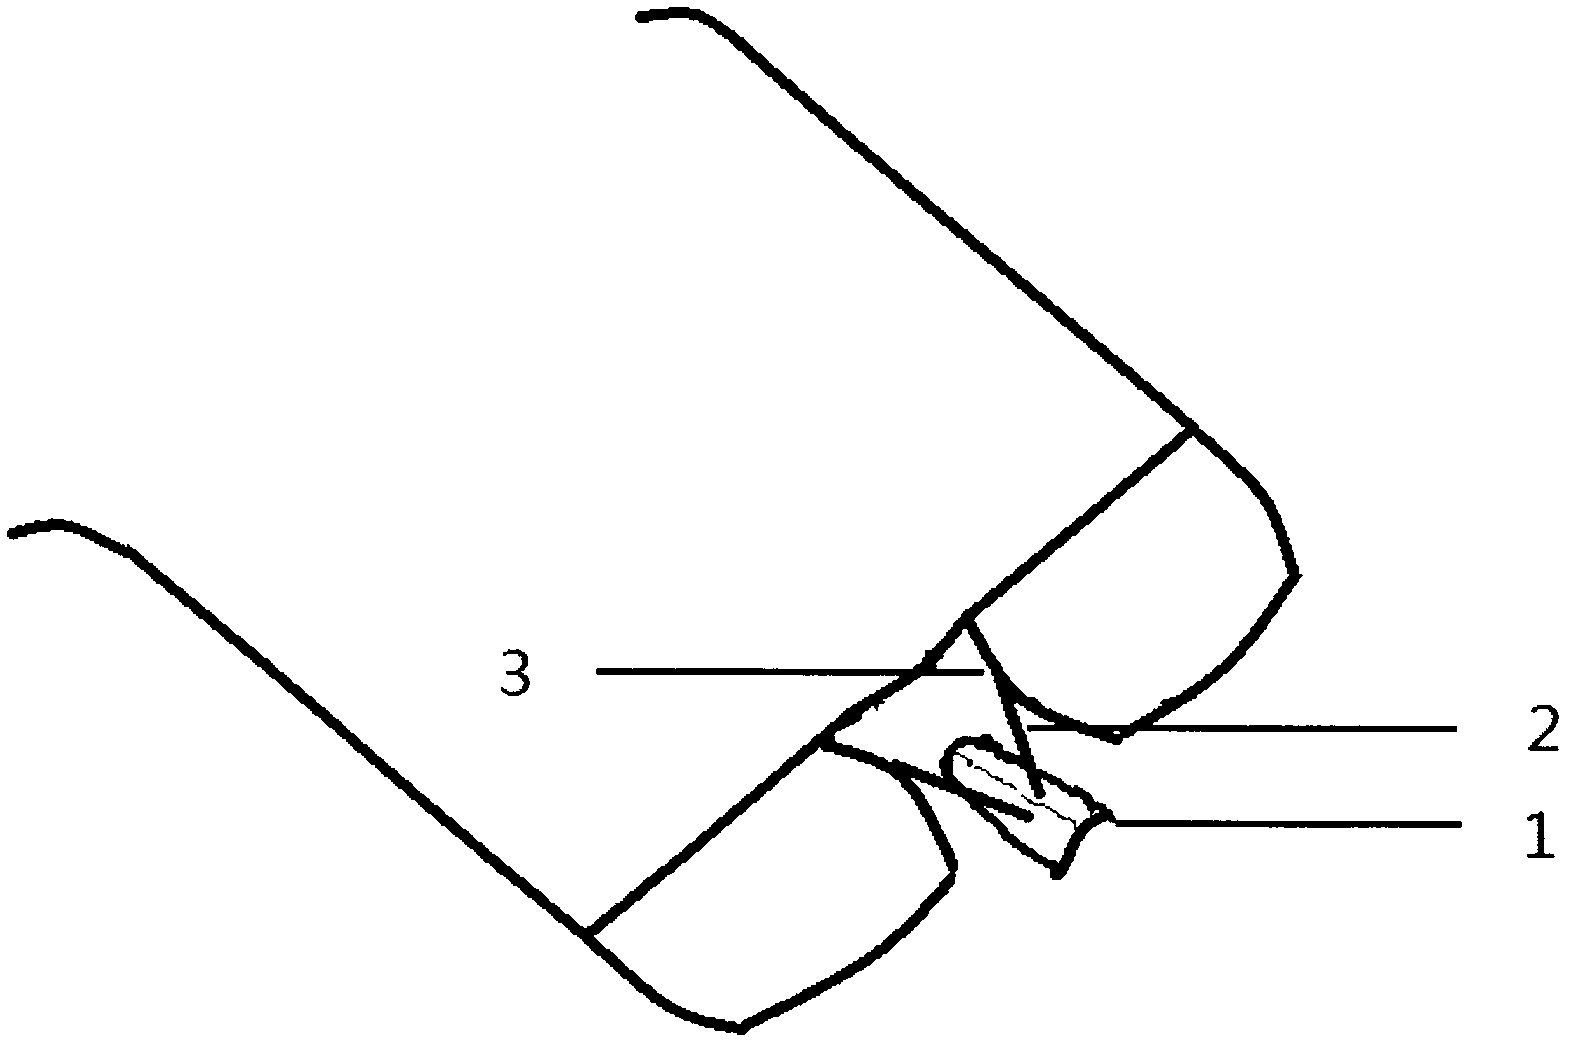 Eyeglass frame with changed nose pad positions and shape